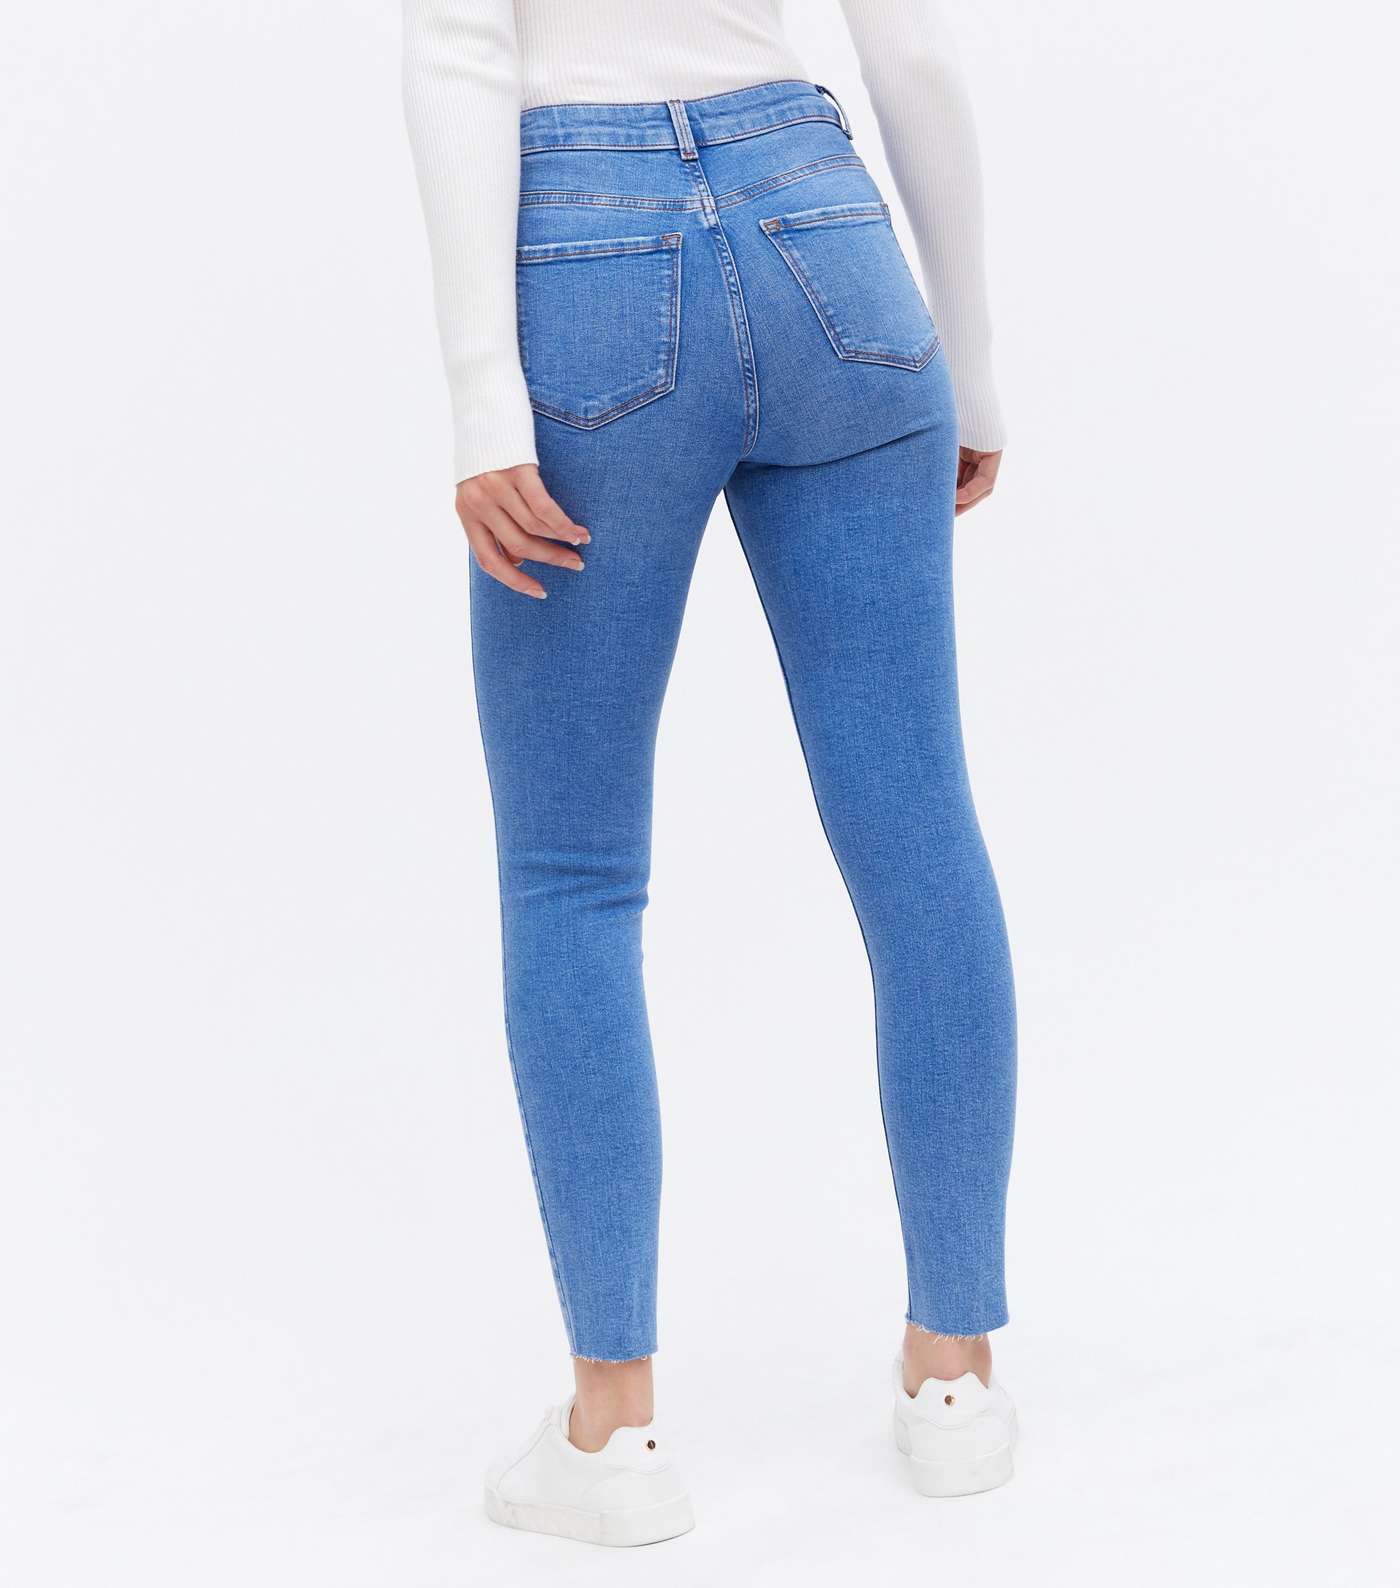 Bright Blue Ripped Knee High Waist Ashleigh Skinny Jeans Image 4